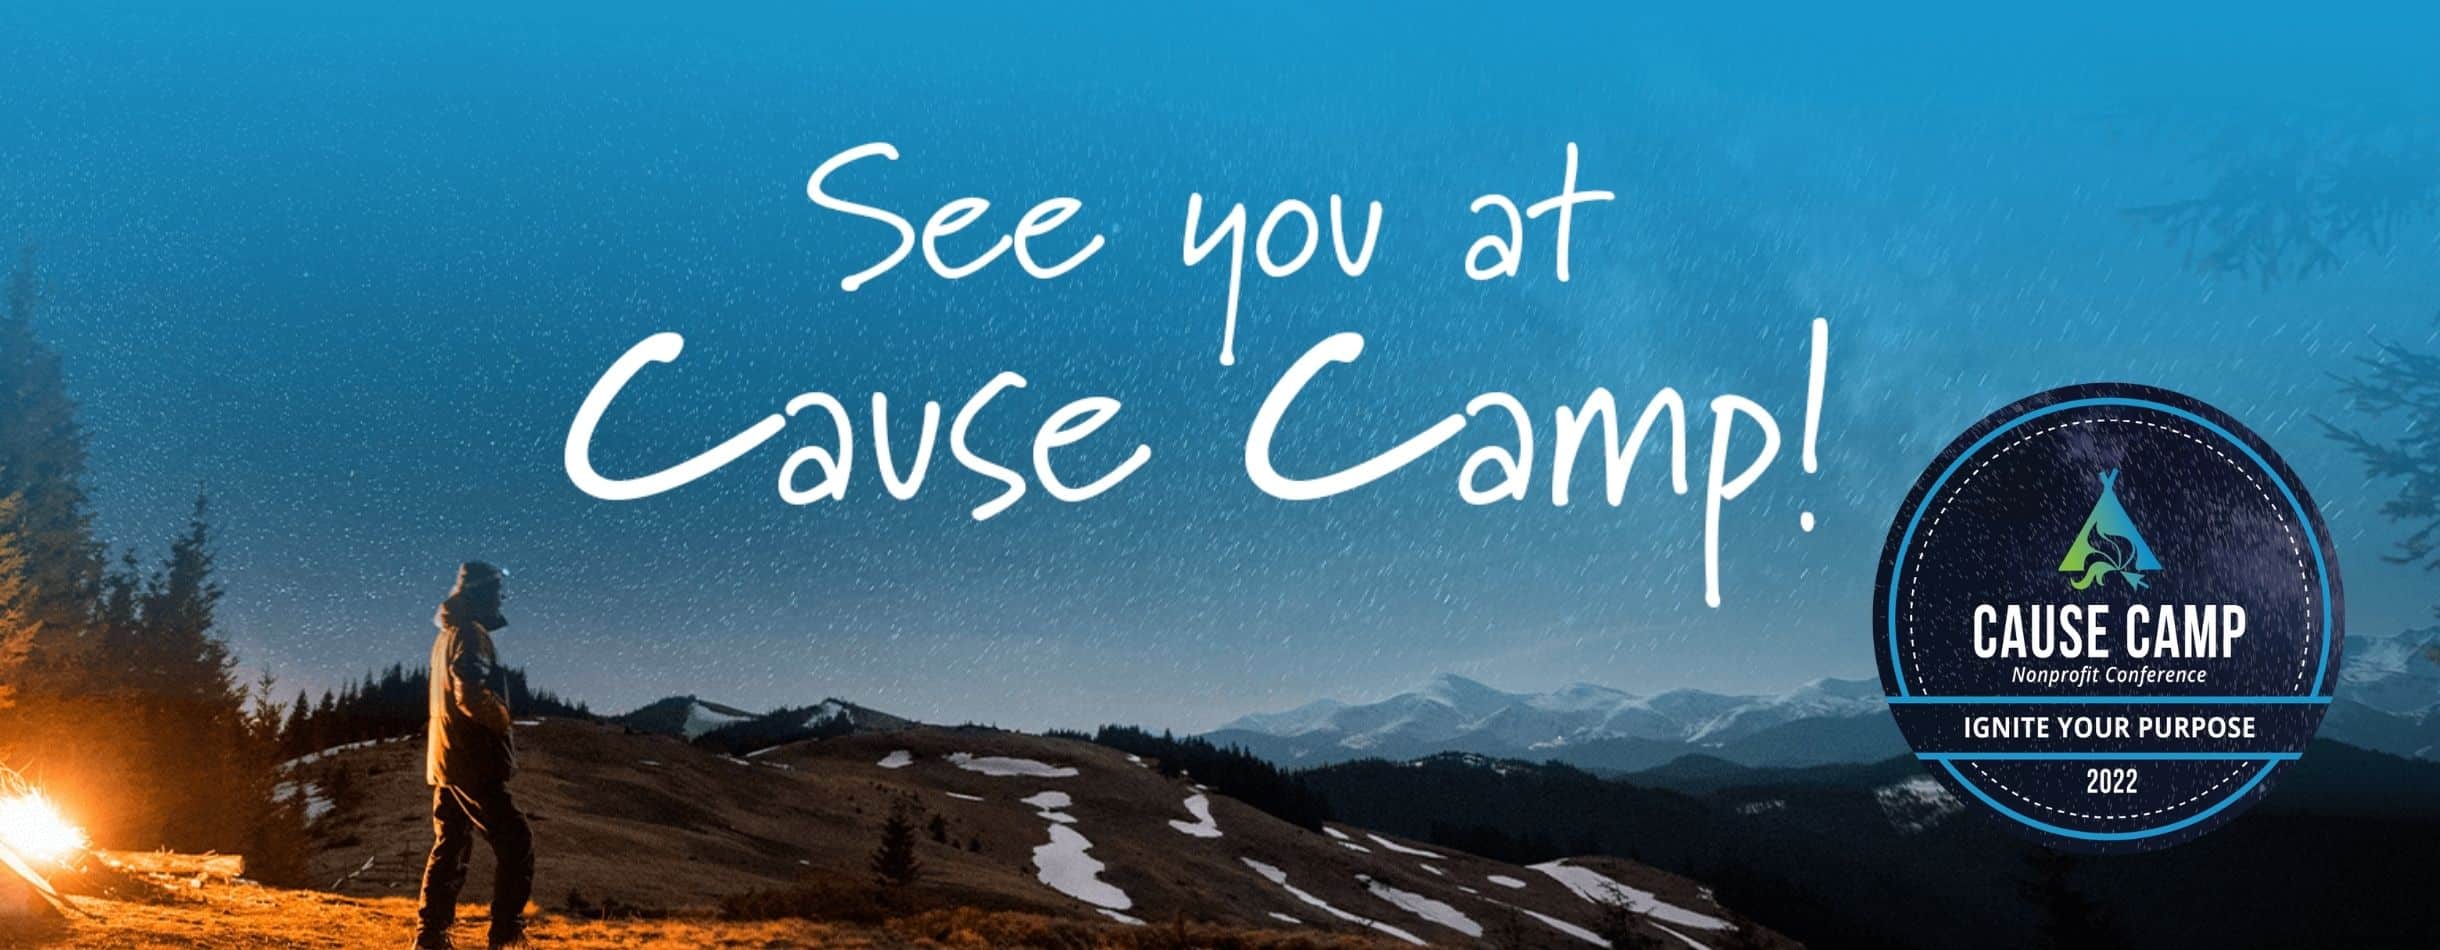 Camp Cause 2022 Banner